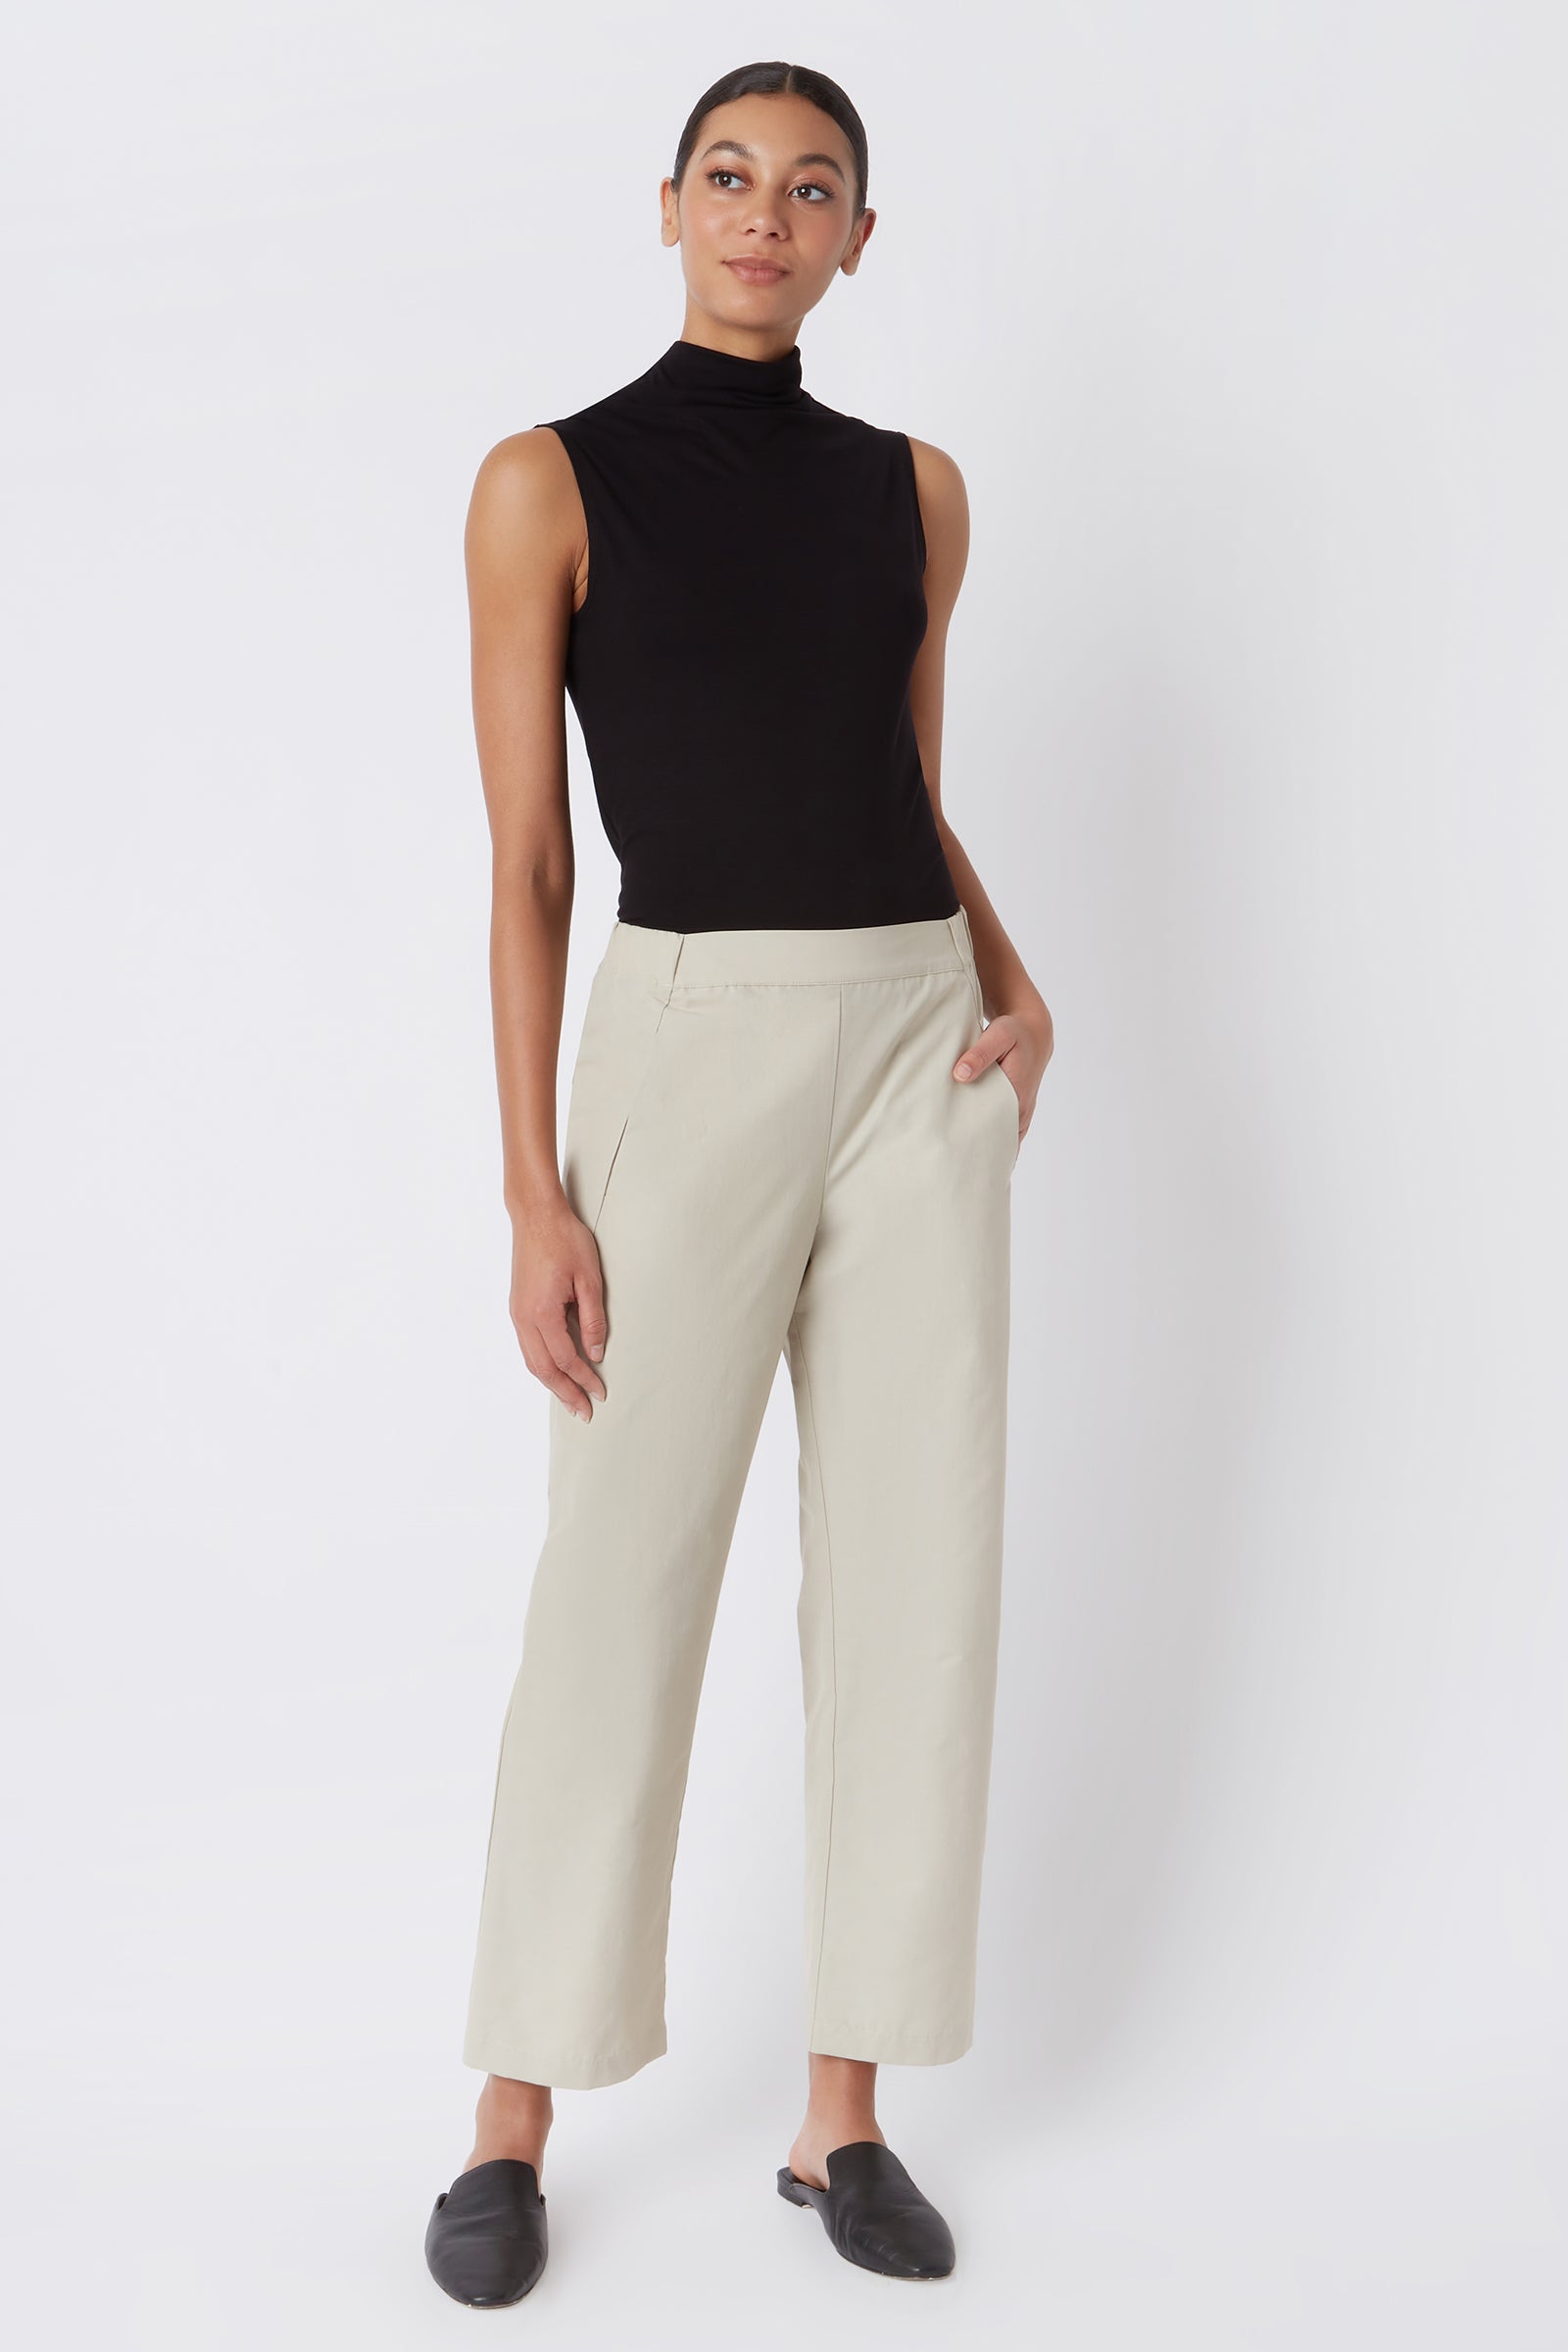 Kal Rieman Brit Crop Pant in Classic Khaki on Model Looking Right Full Front View